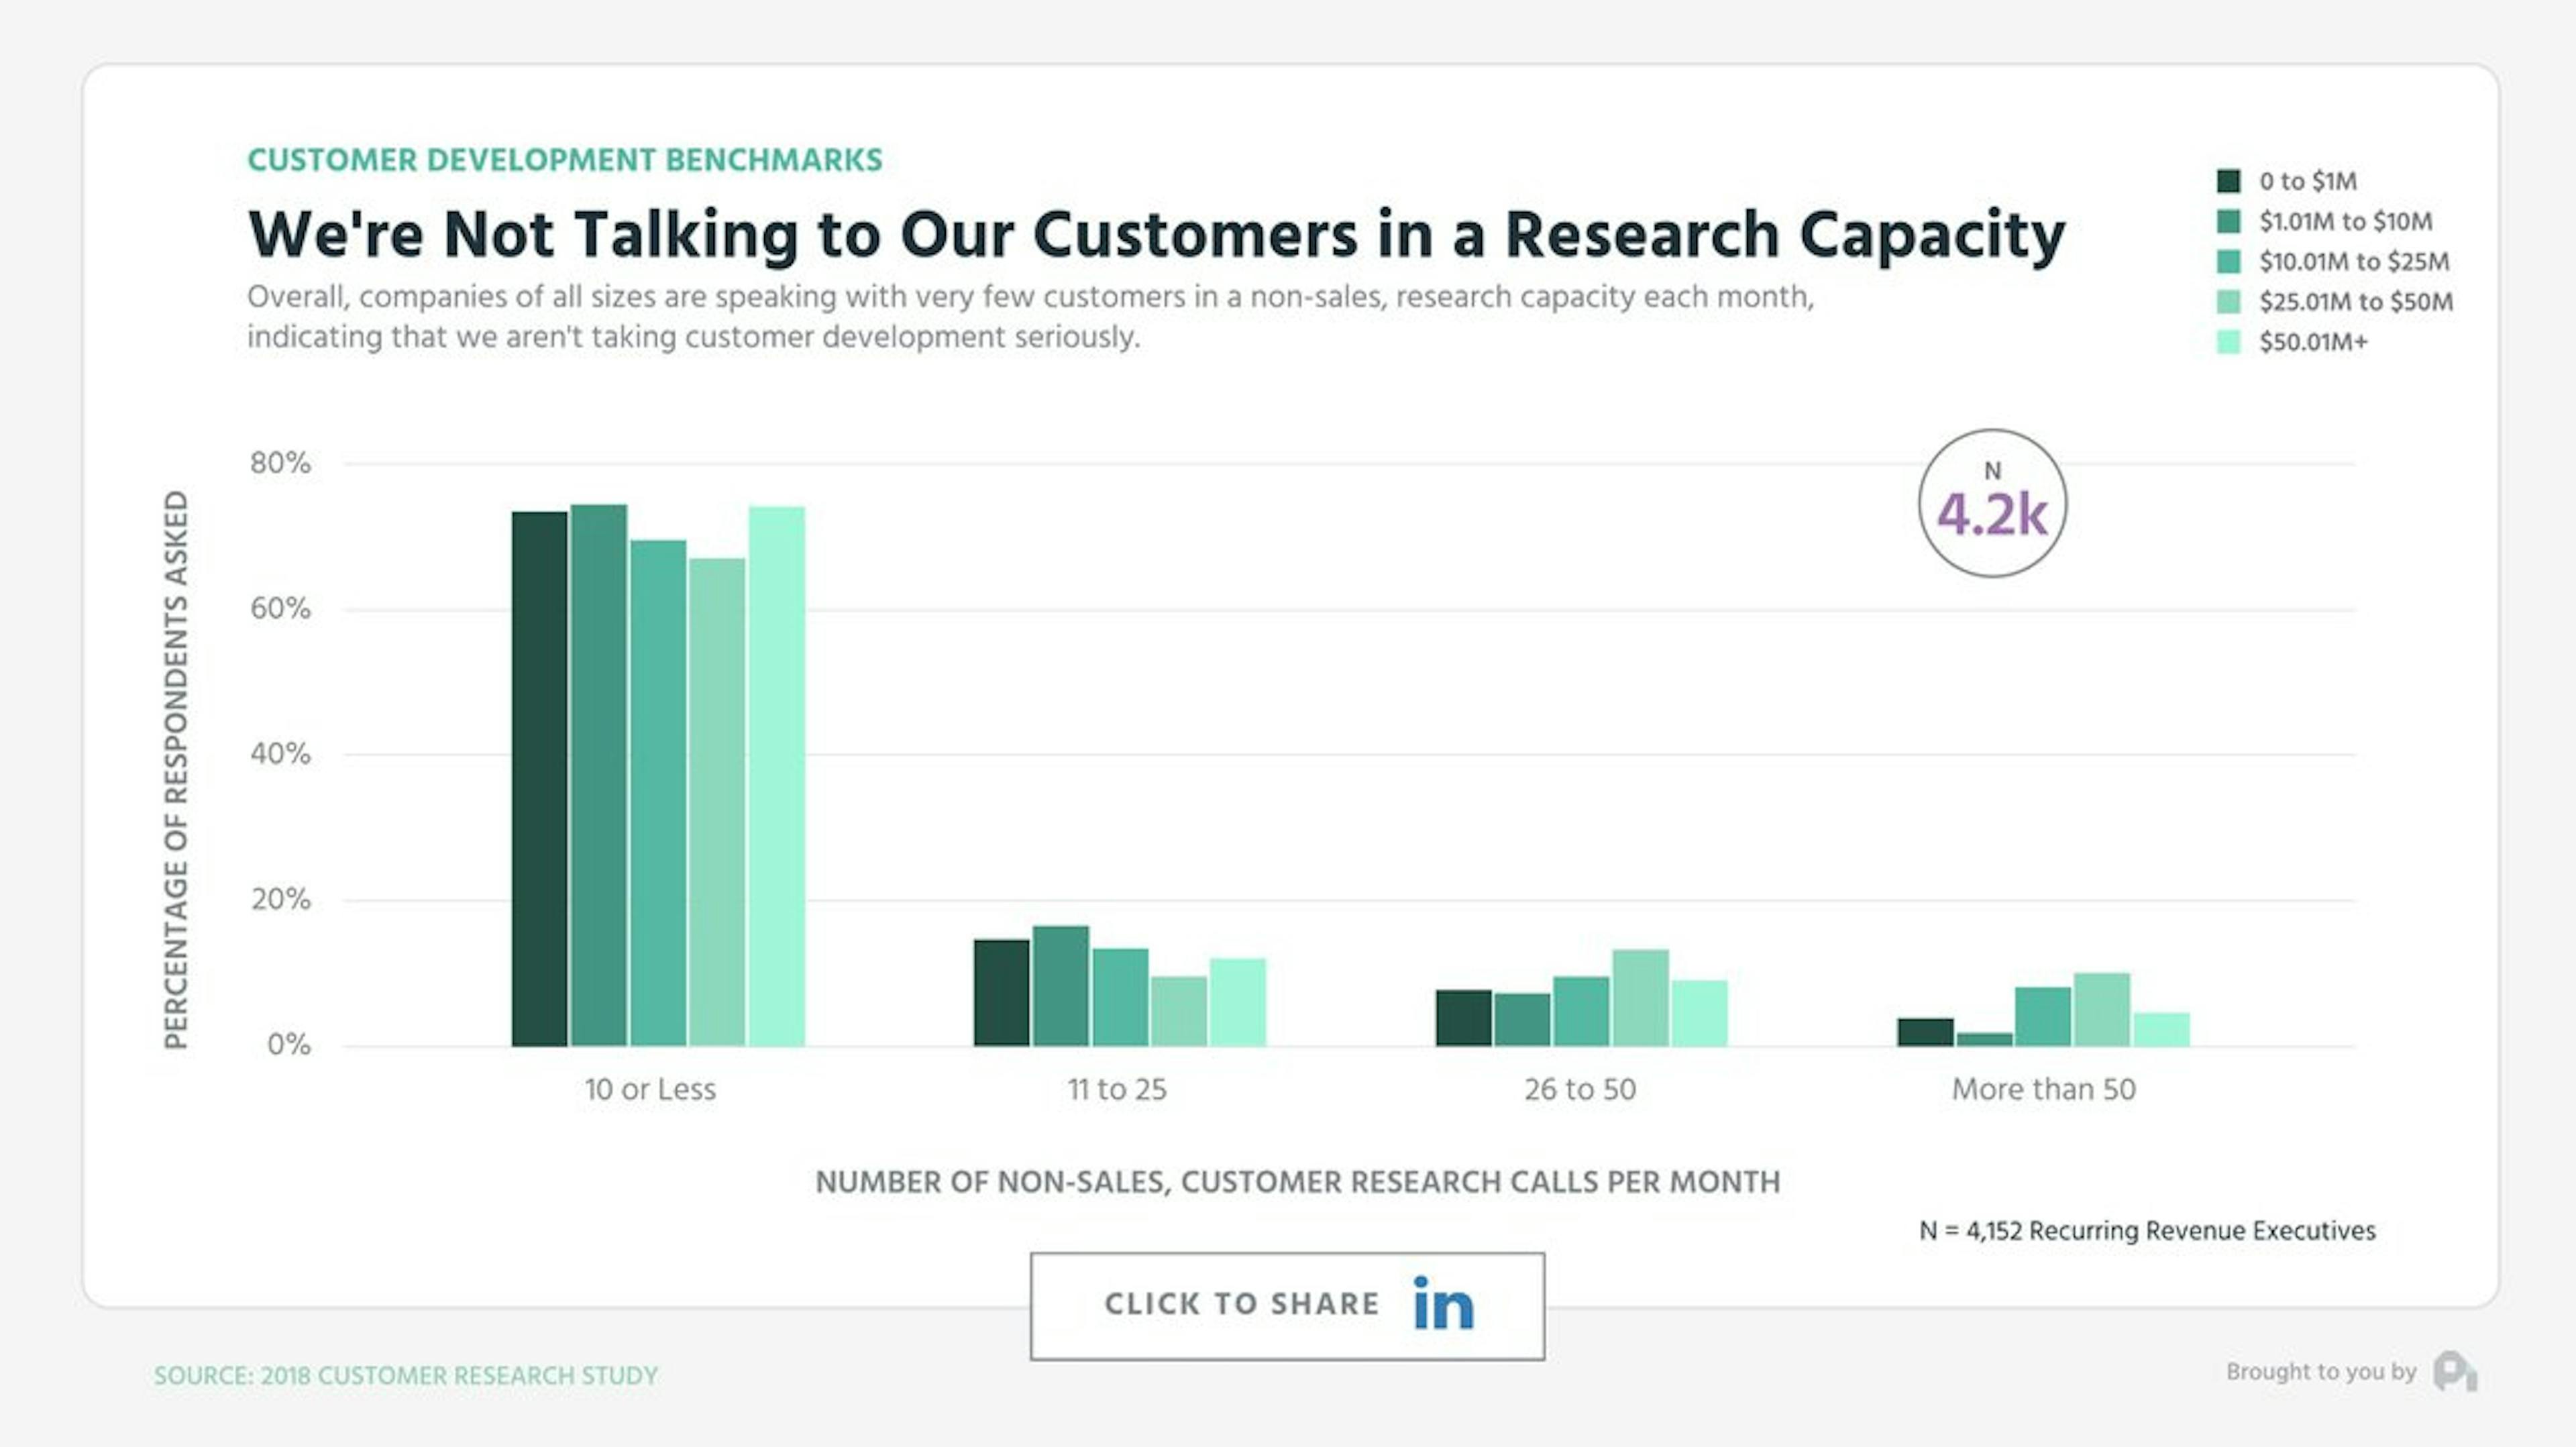 Table: The majority of companies speak to 10 or less customers a month in a research capacity.